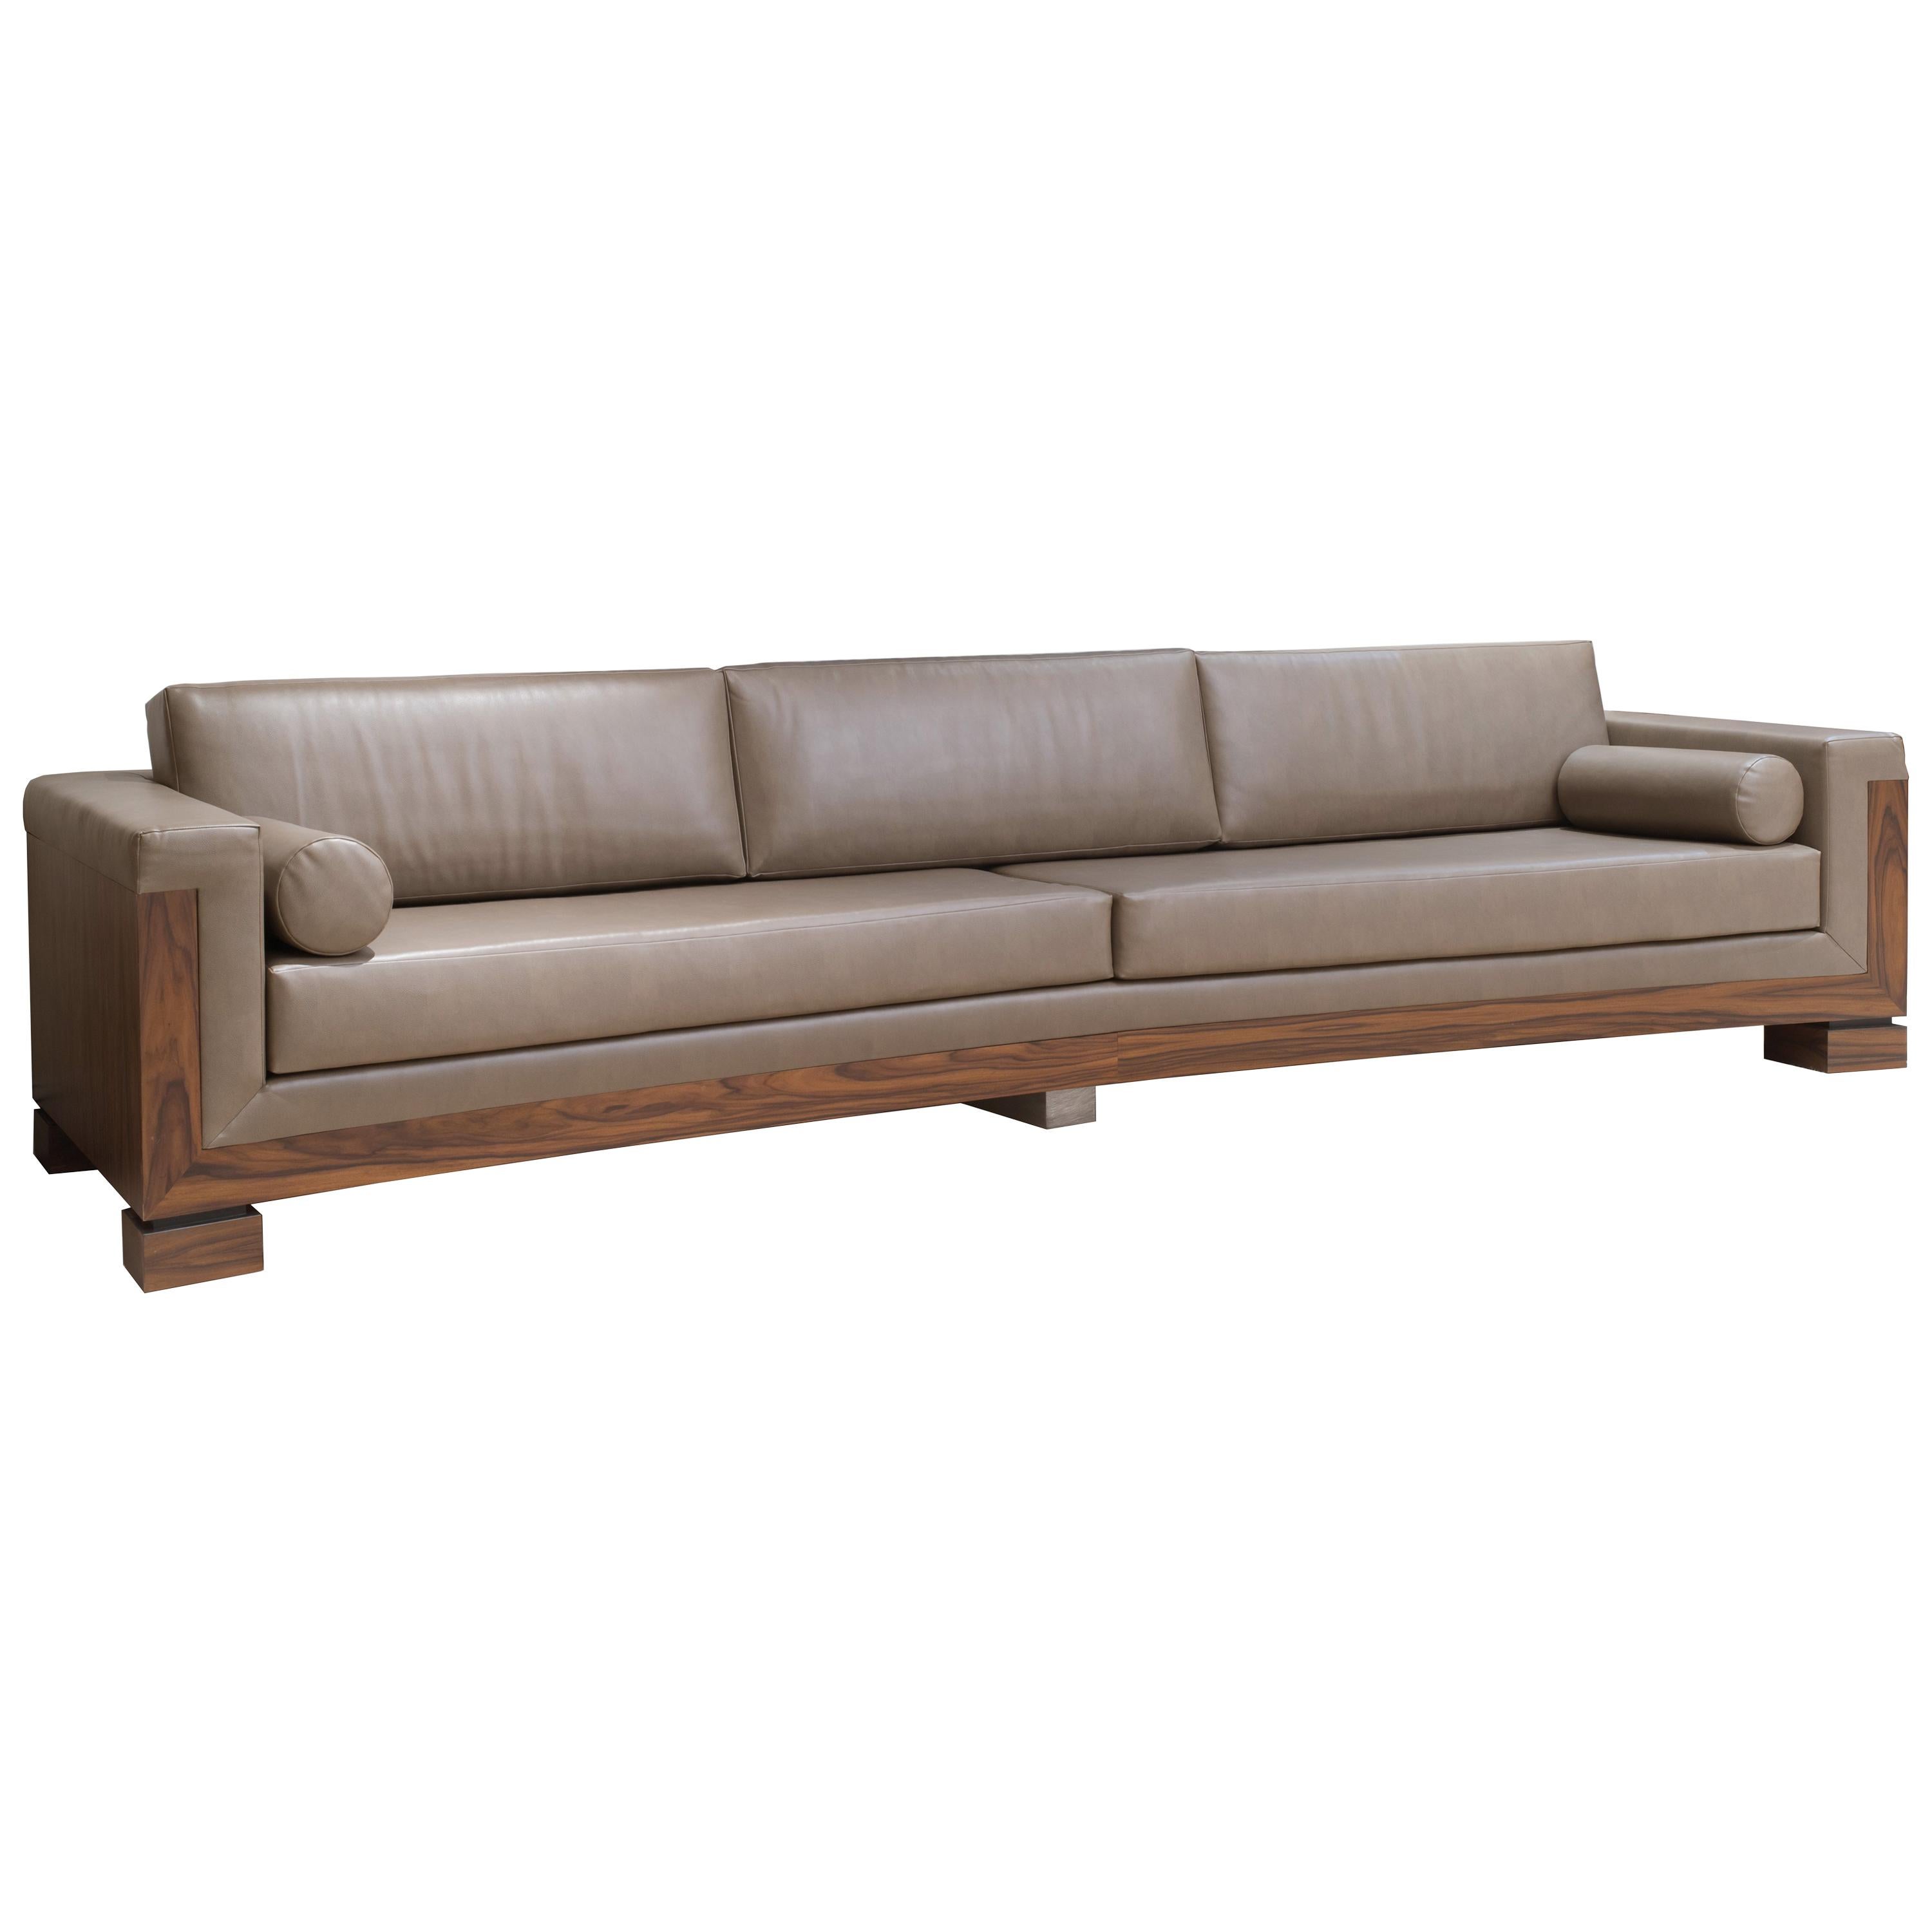 Contemporary Extra Long Taupe Leather Sofa